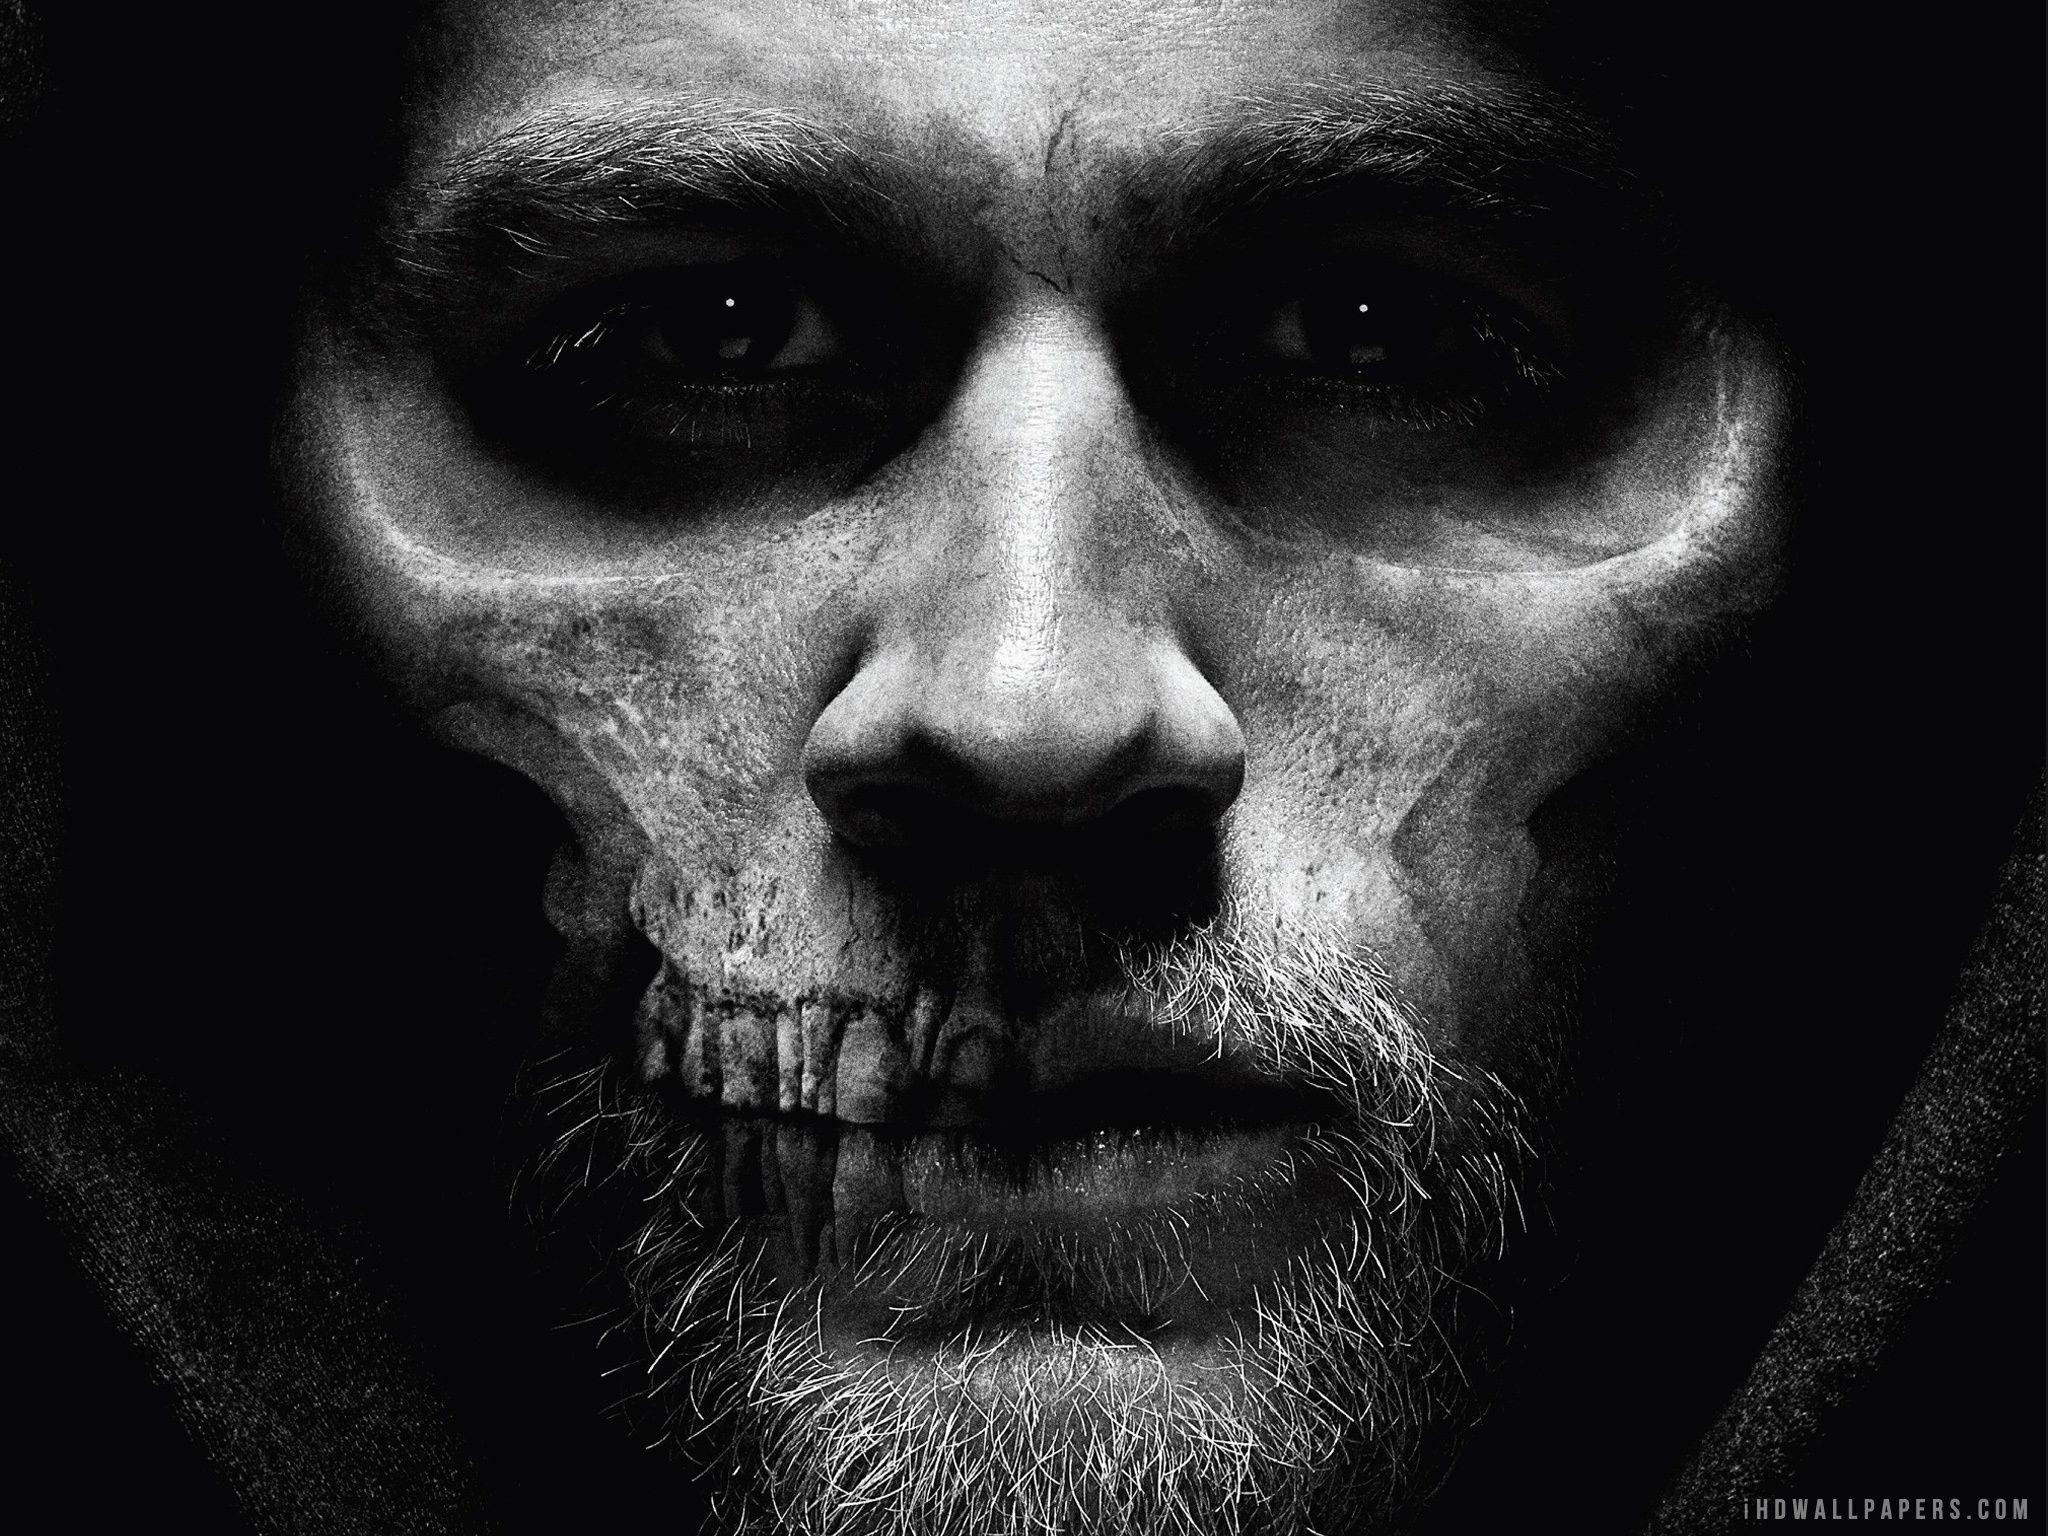 Sons Of Anarchy iPhone Wallpaper